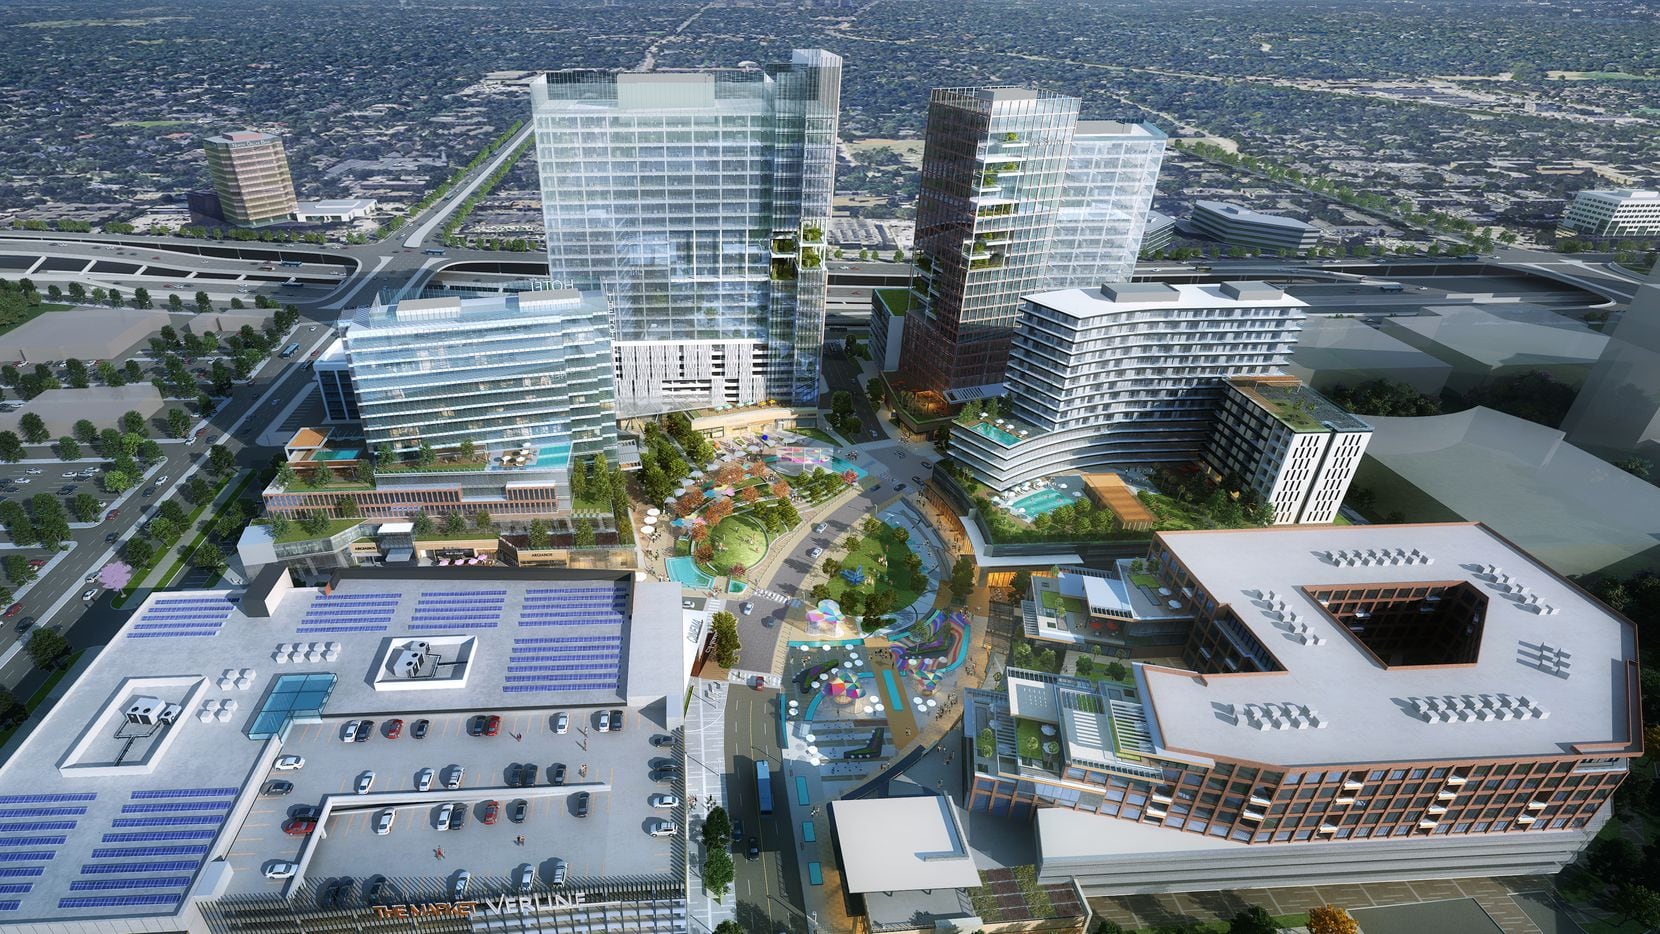 Seritage Growth Properties had planned to build a high-rise mixed-use development on its...